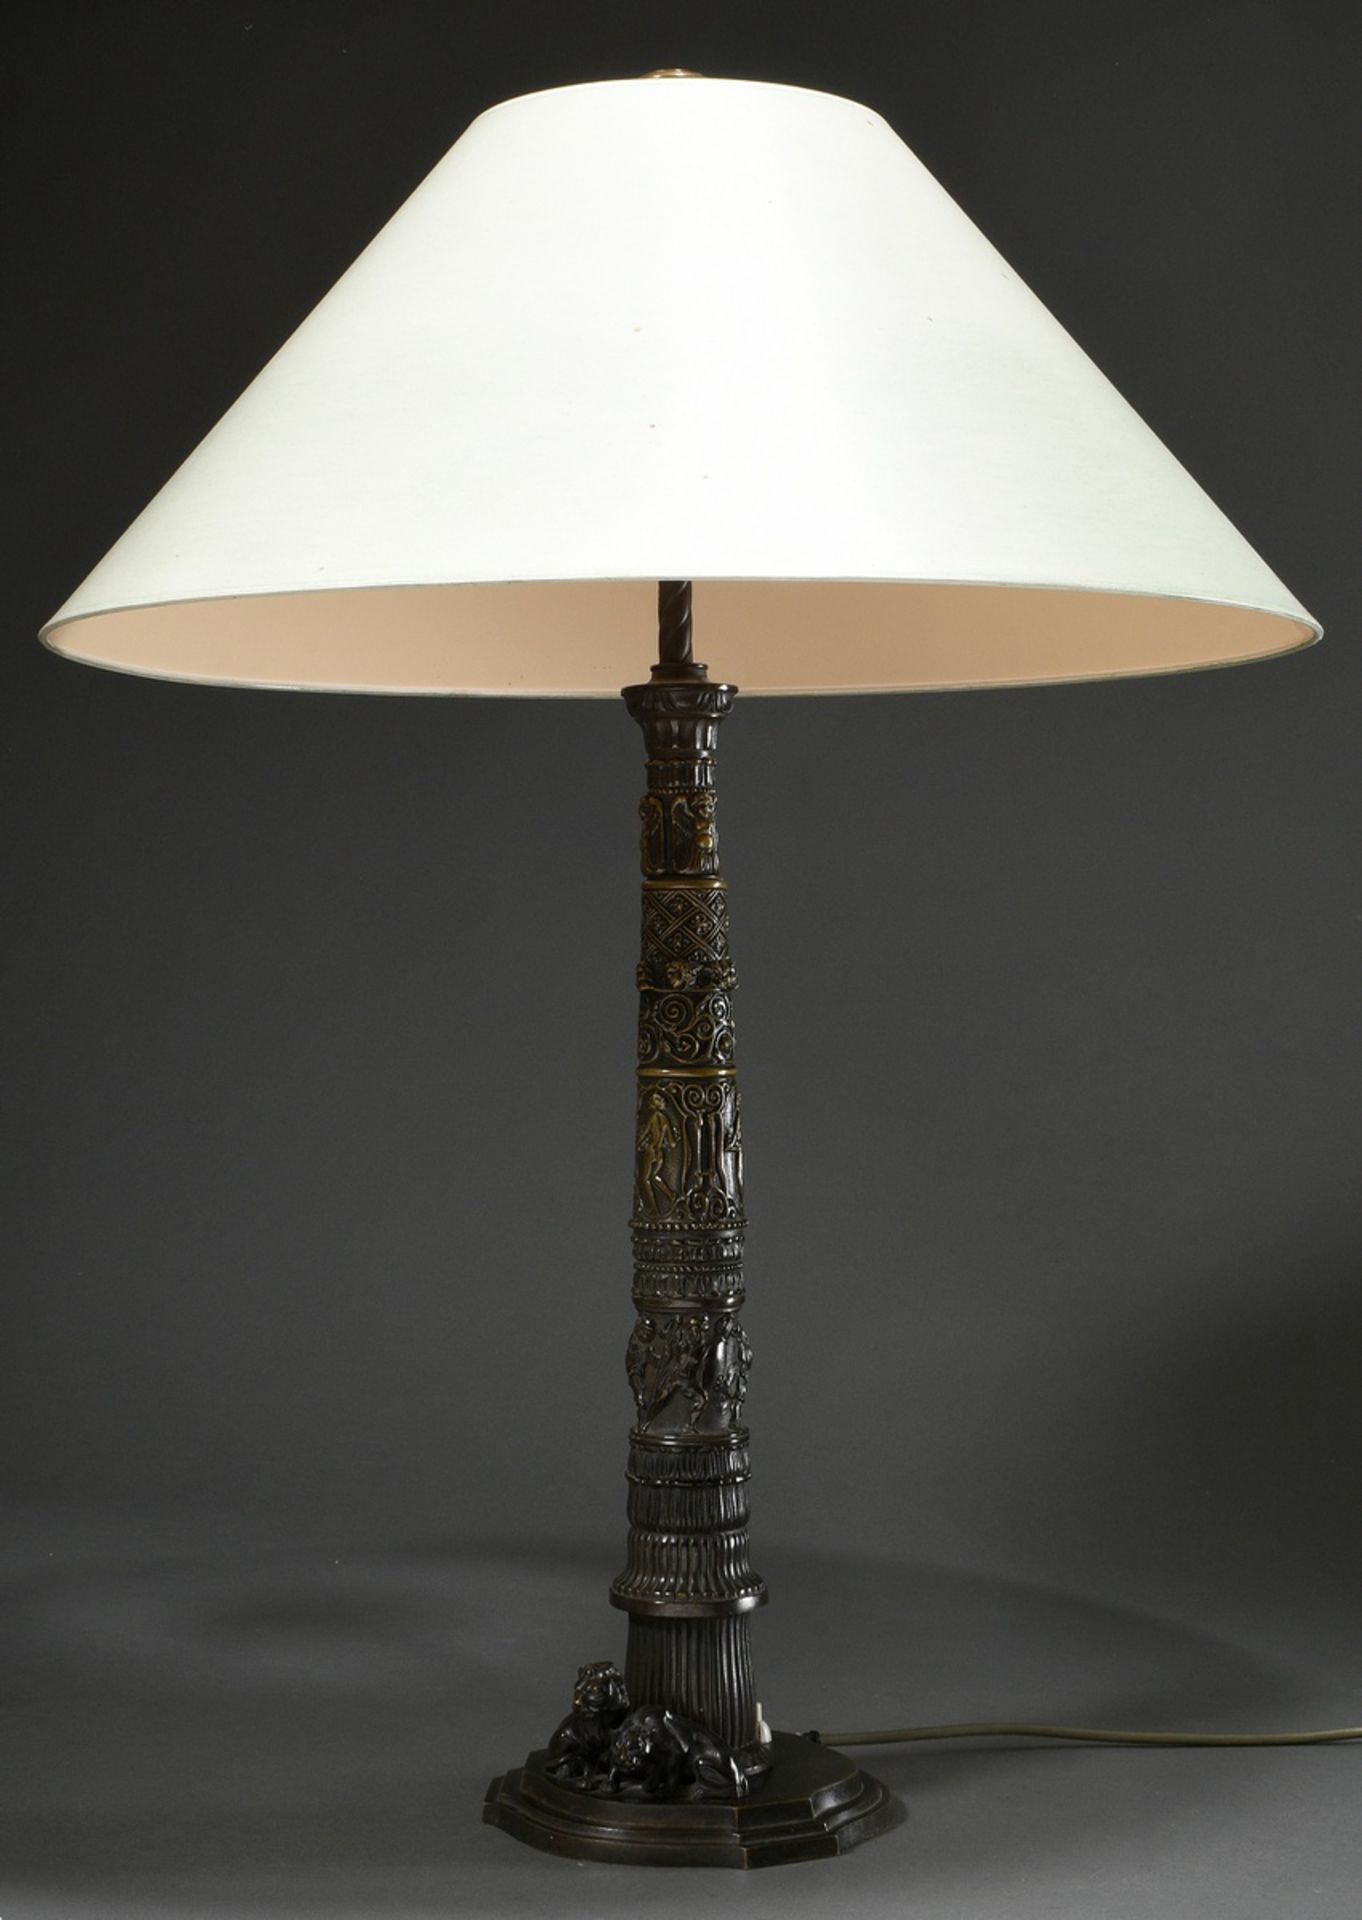 Lamp with bronze base in column form with alternating ornamental and figural friezes "Angels", "Mas